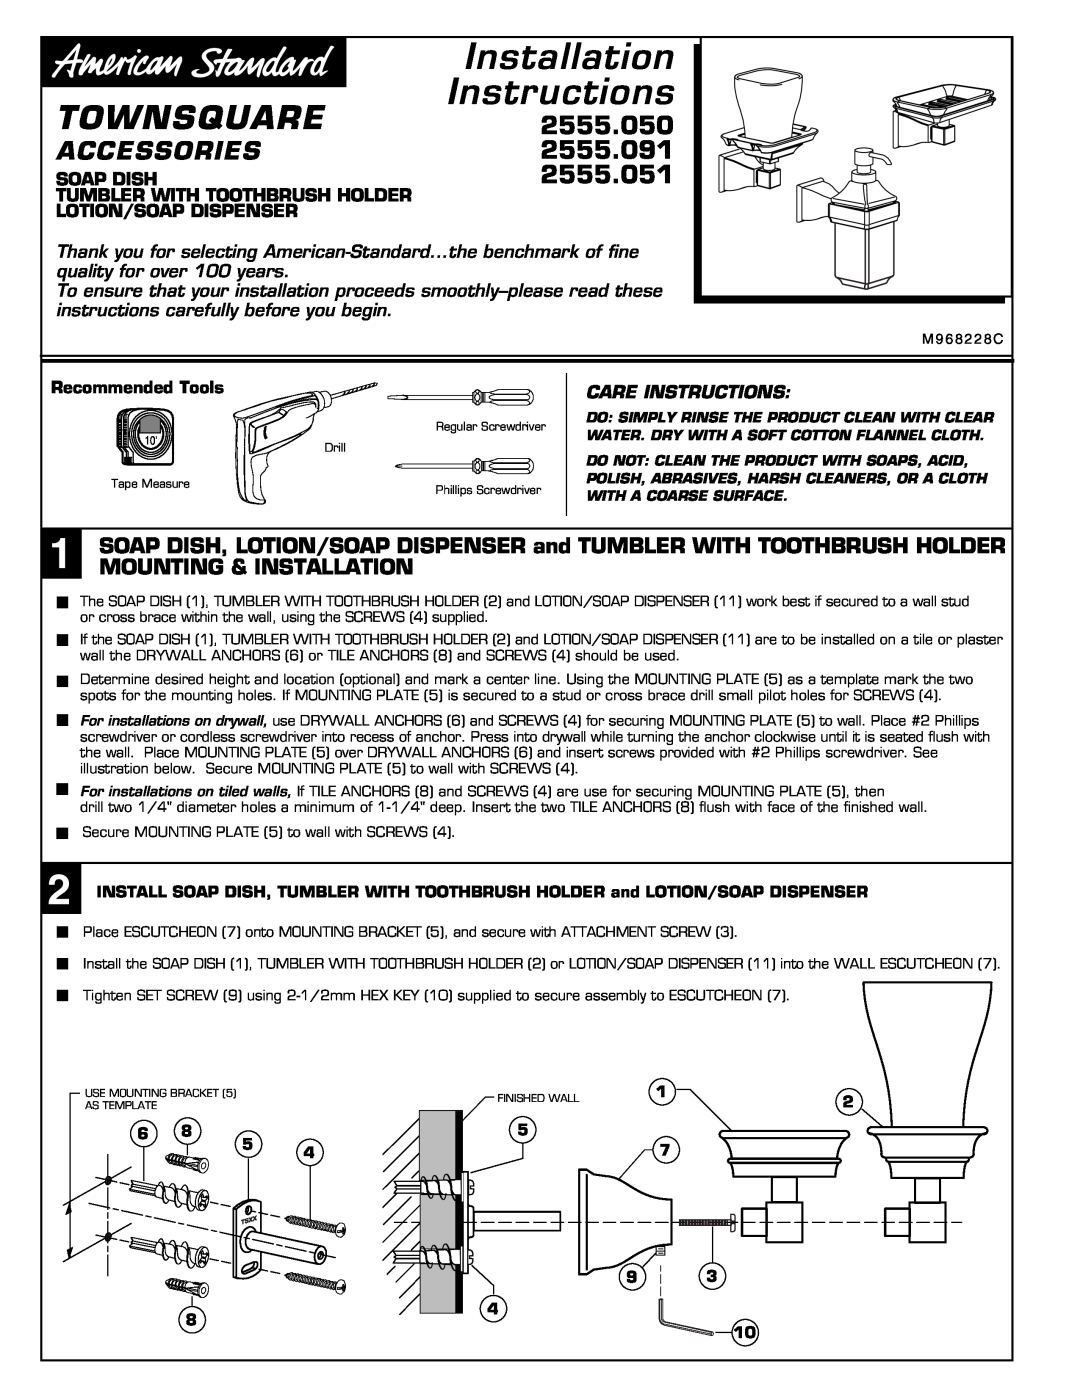 American Standard 2555.051 installation instructions Townsquare, 2555.050, Accessories, 2555.091, Soap Dish, Installation 